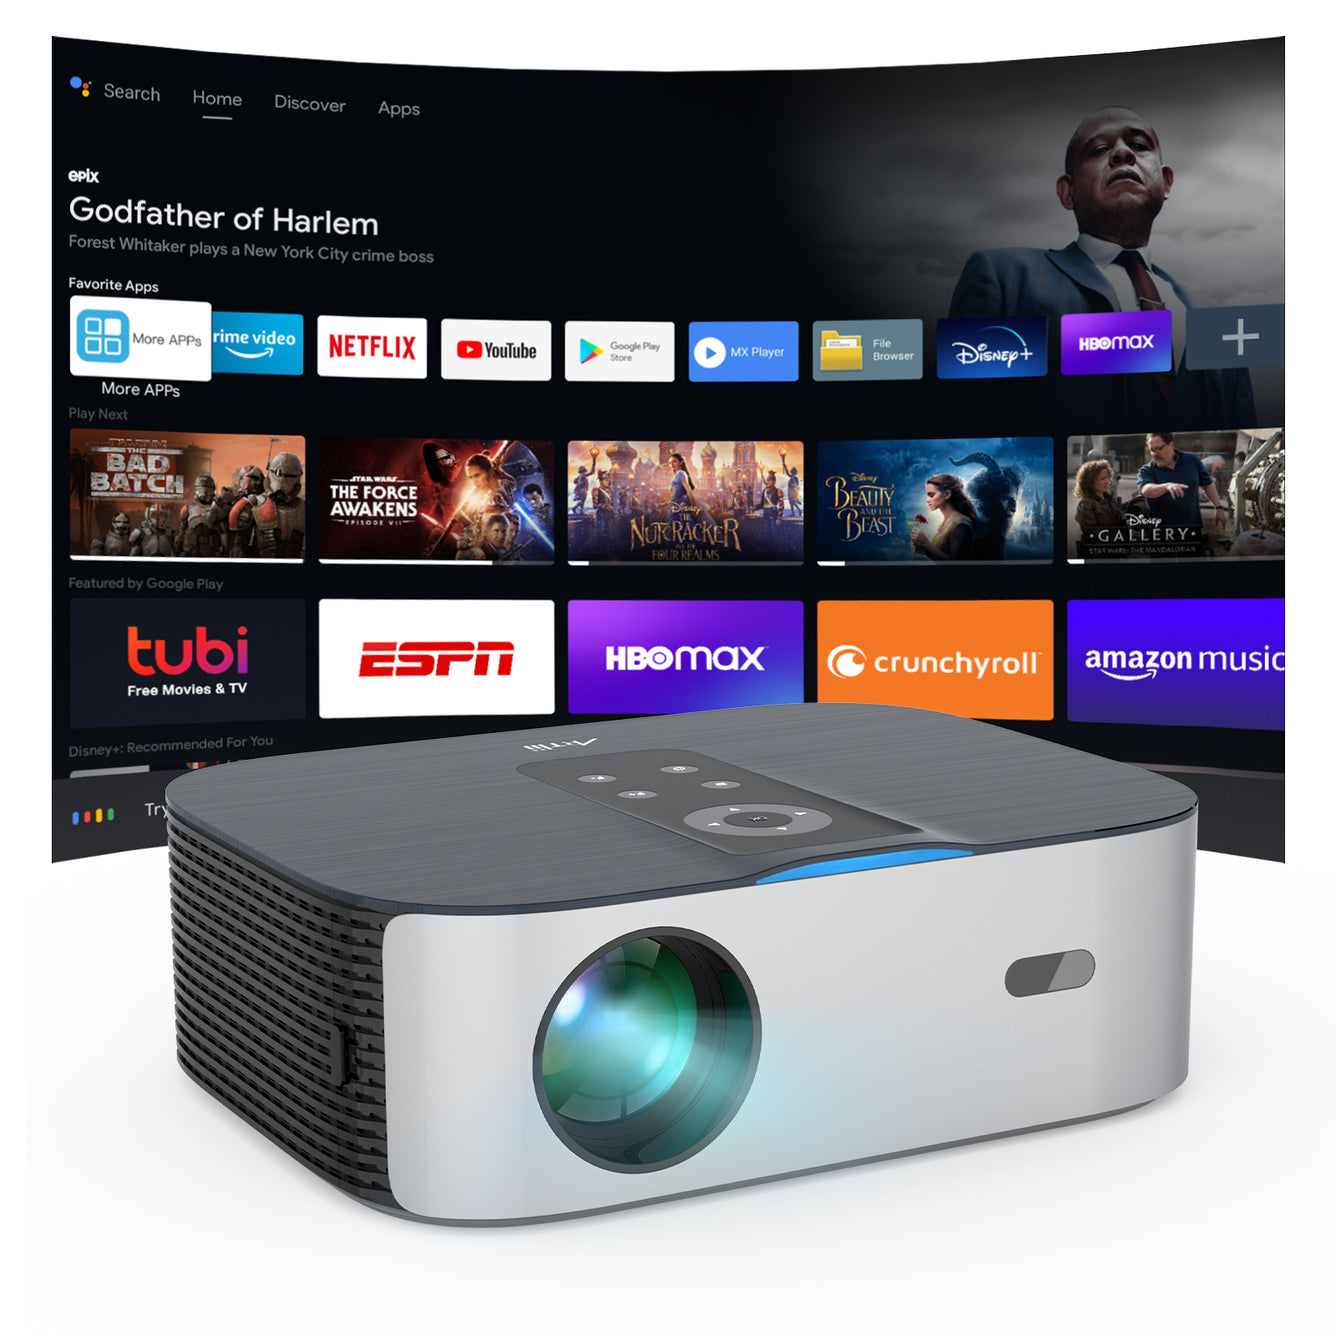 Artlii Play 4 Projector 4k integrates Android TV 10 System